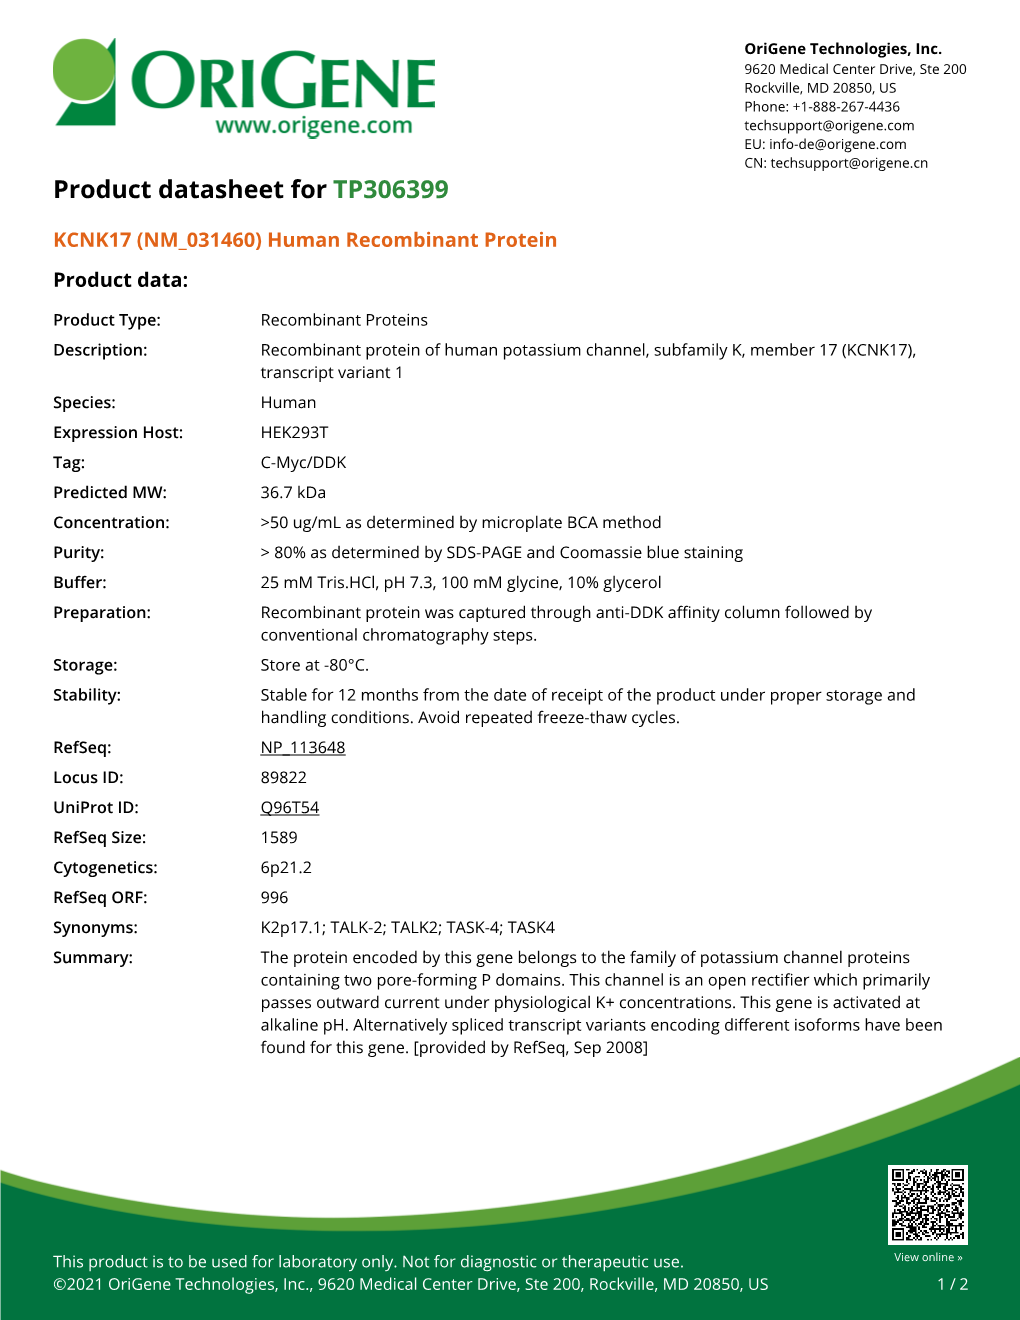 KCNK17 (NM 031460) Human Recombinant Protein – TP306399